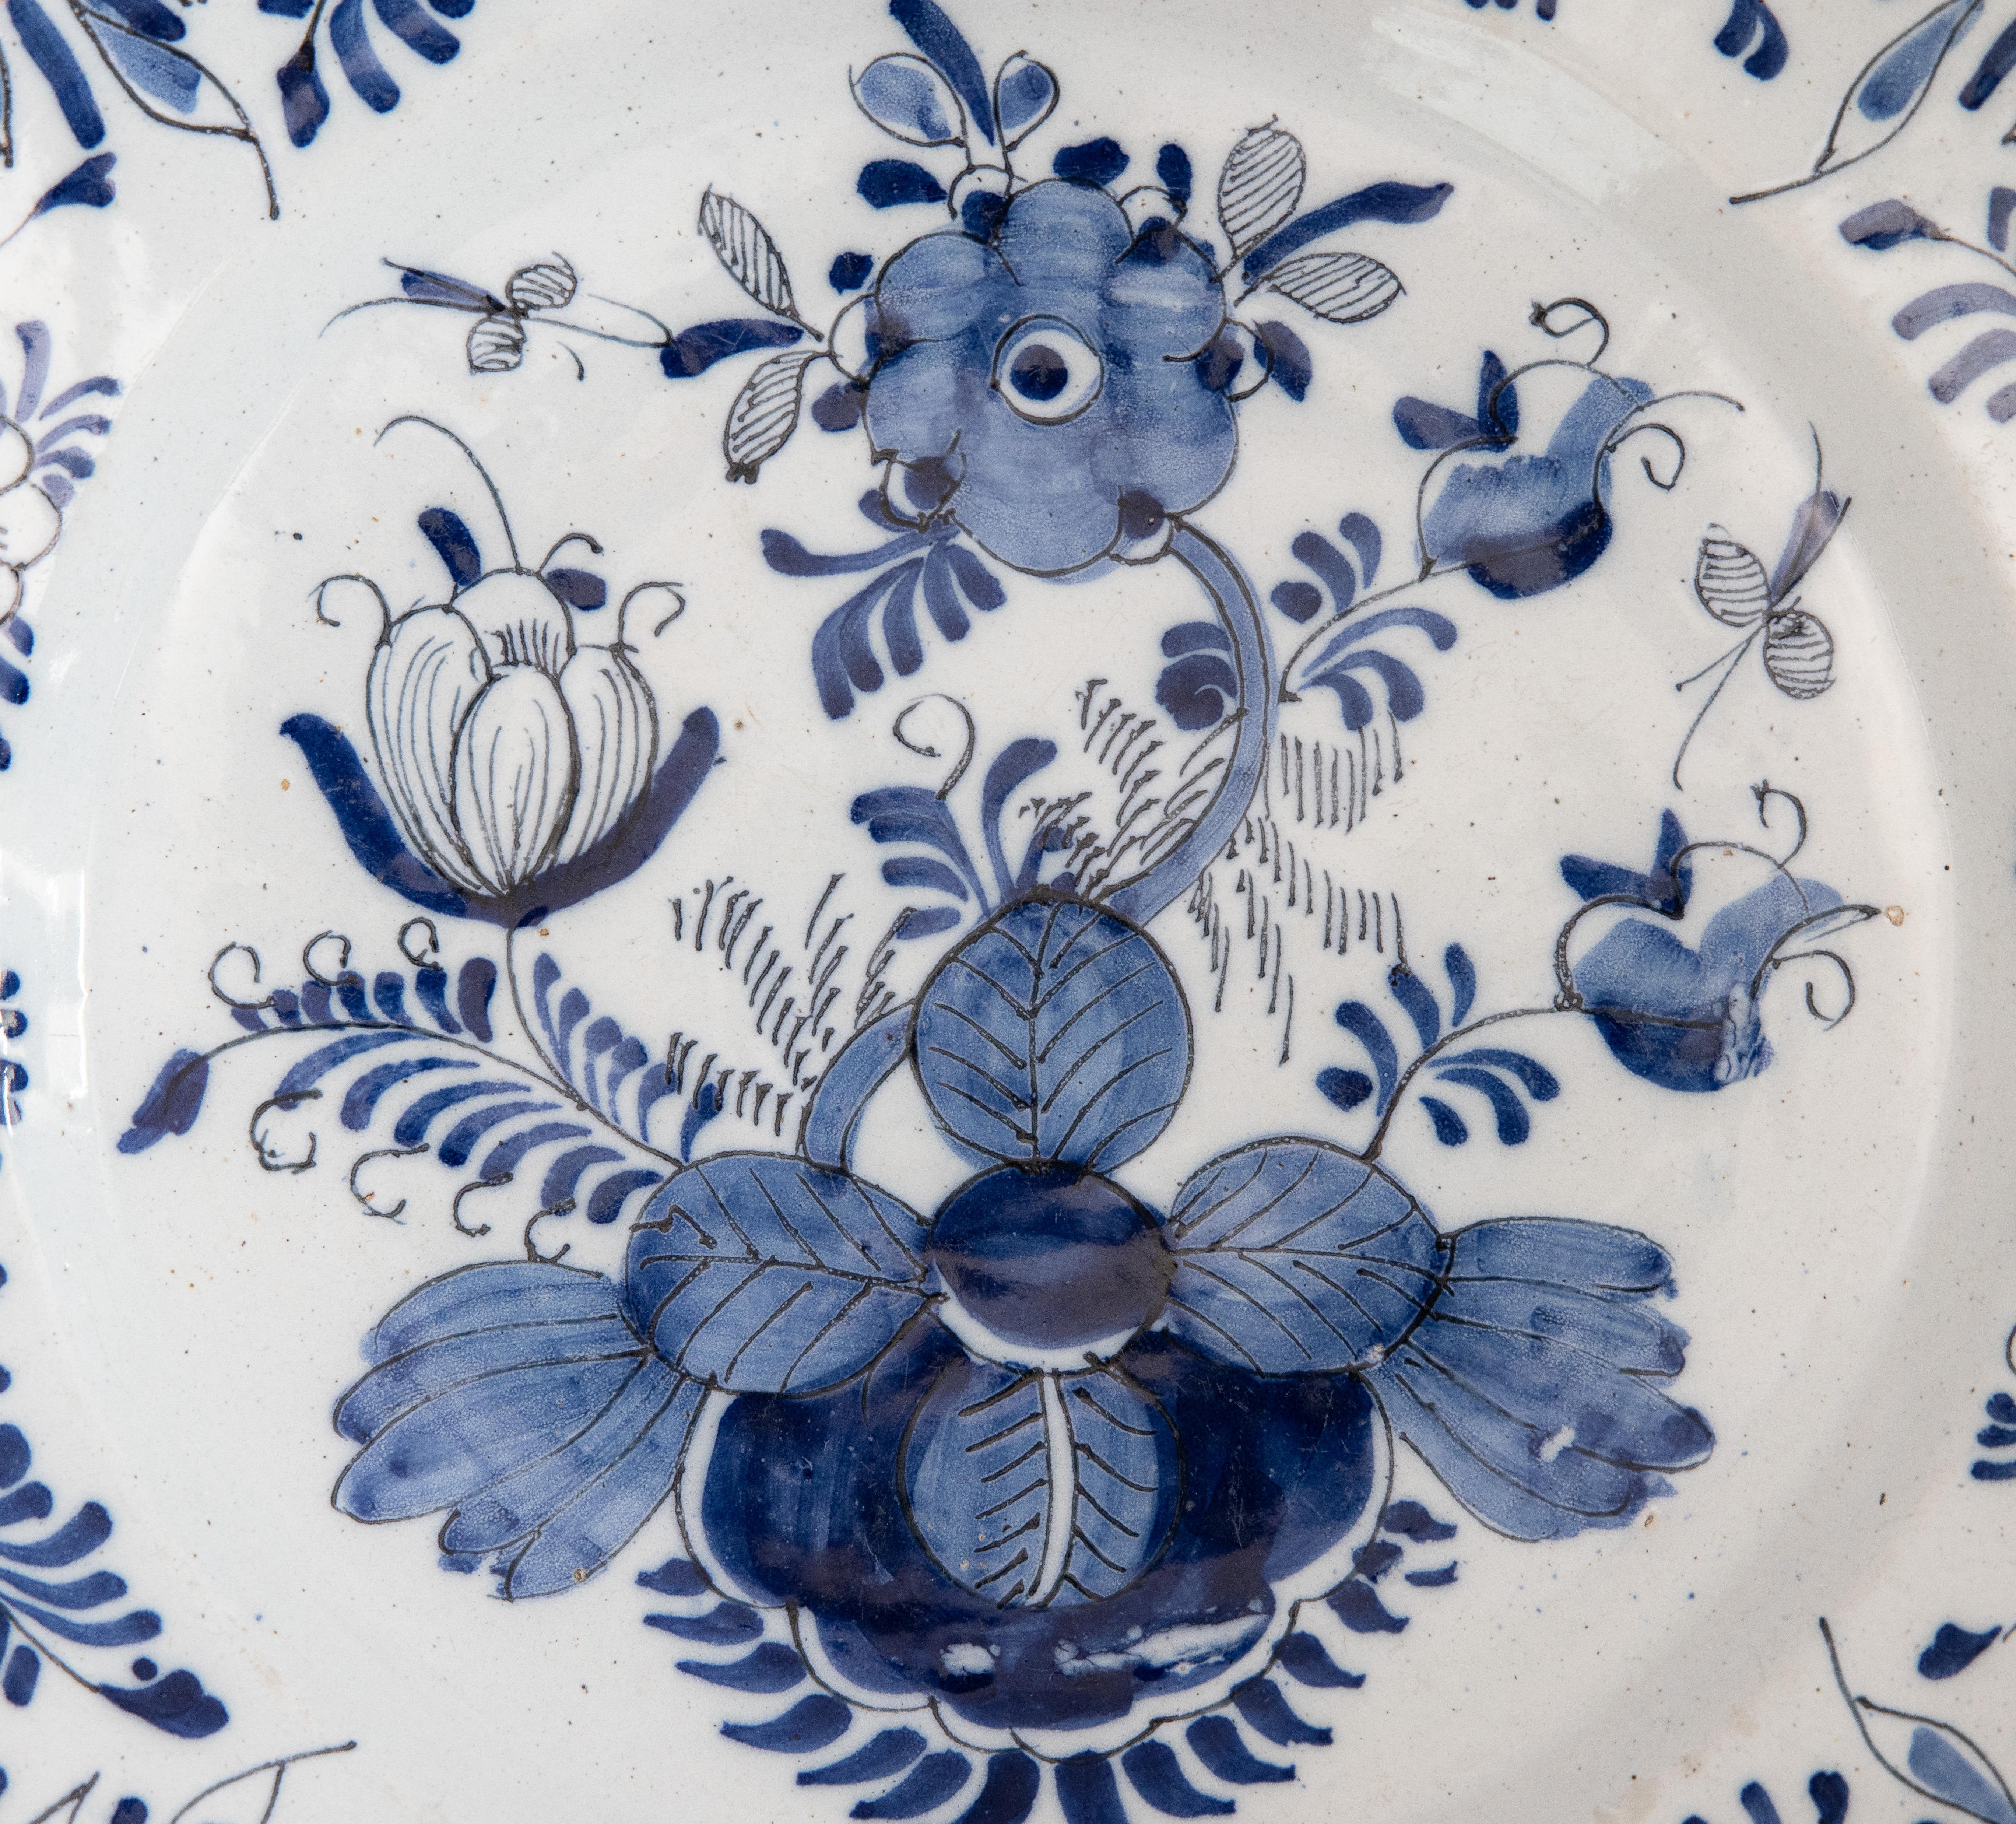 A large 18th-Century Dutch Delft charger hand painted with a floral and foliate design with insects in cobalt blue and white, circa 1750. This lovely large plate would be wonderful added to a collection, displayed on a wall, plate rack, or cabinet.